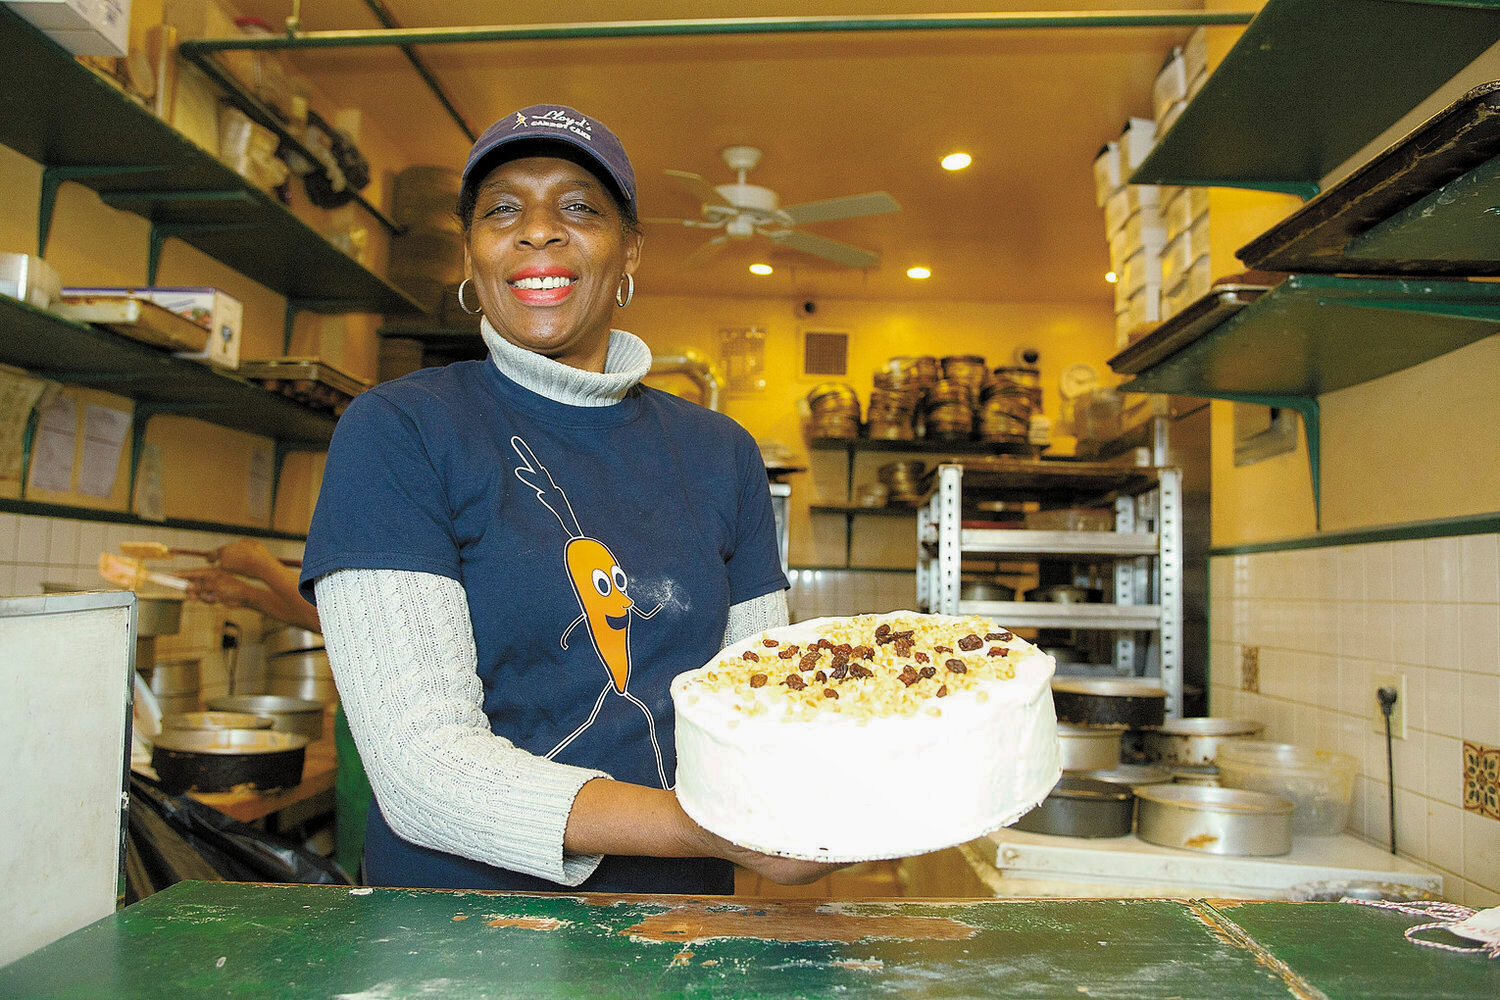 With the help of Lloyd’s Caribbean family recipe, Llyod and Betty Campbell-Adams opened a carrot cake bakery. After Lloyd’s death in 2007, Betty quit her job to work full time at Lloyd’s. Since then she has expanded the business with nationwide and international  shipping available.